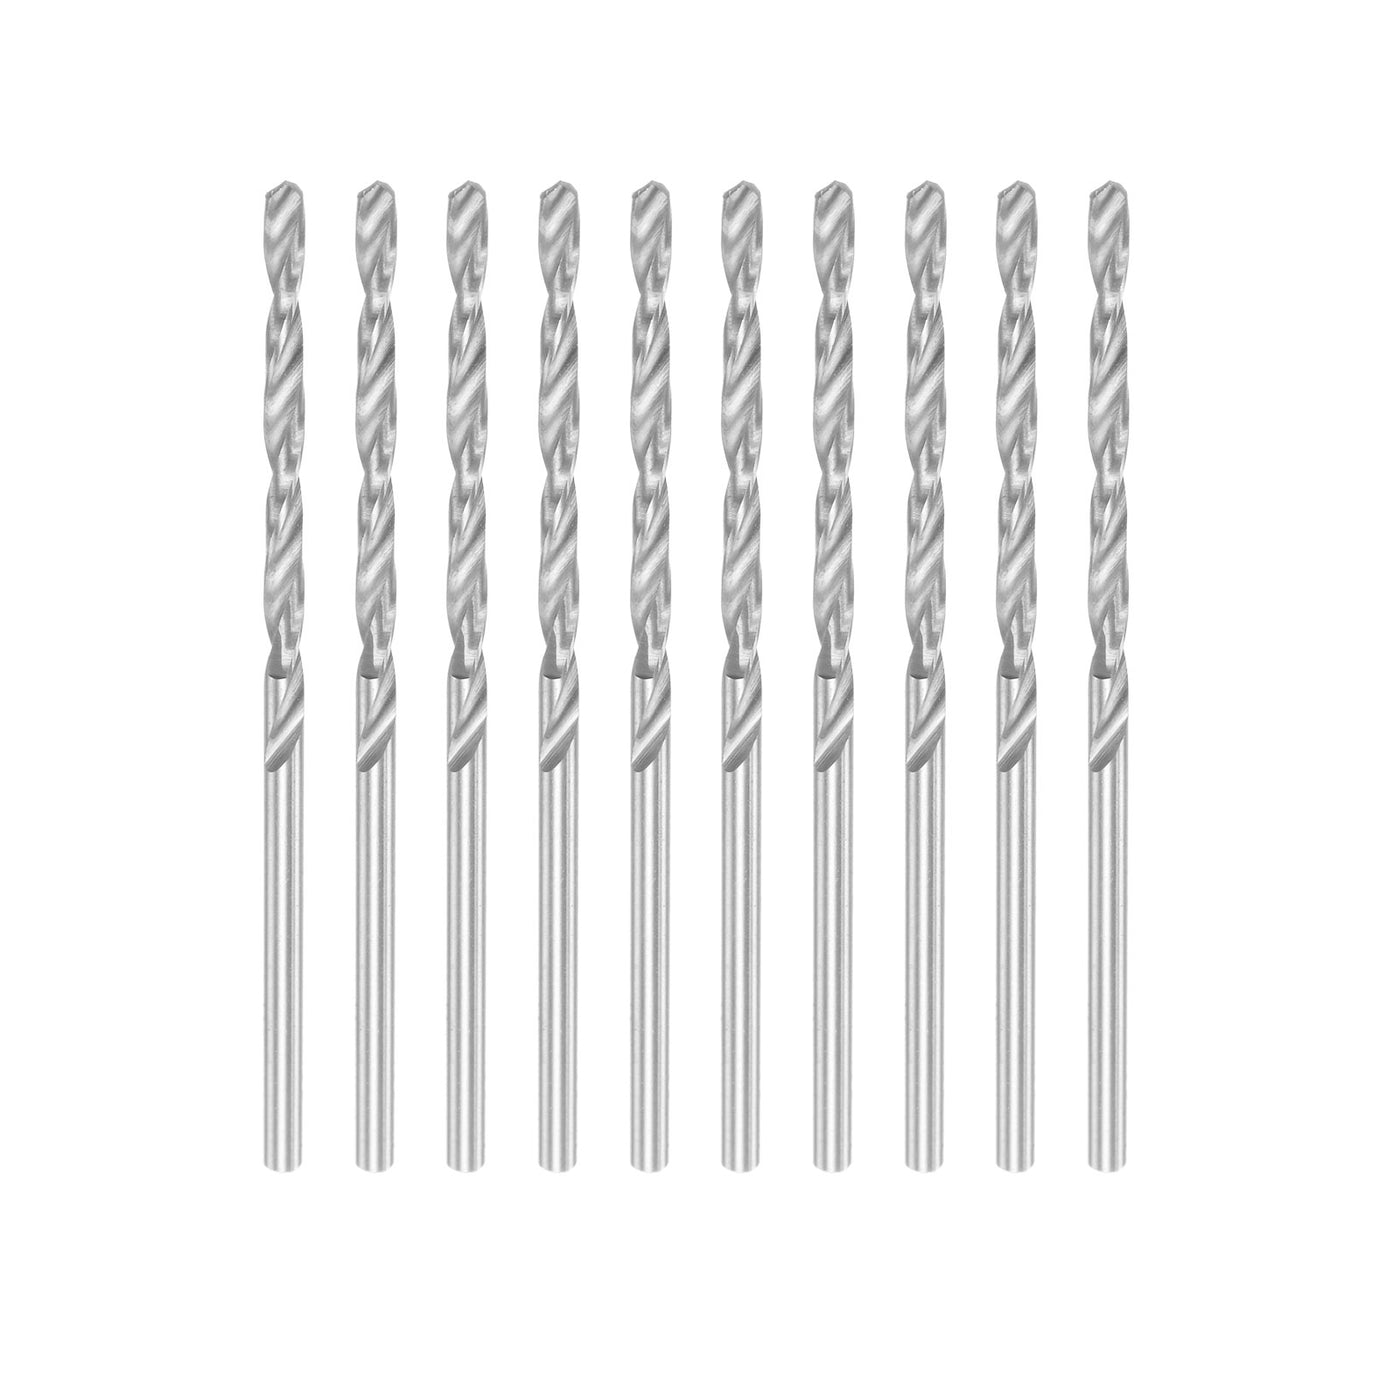 uxcell Uxcell 10 Pcs 2.25mm High Speed Steel Drill Bits, Fully Ground 58mm Length Drill Bit